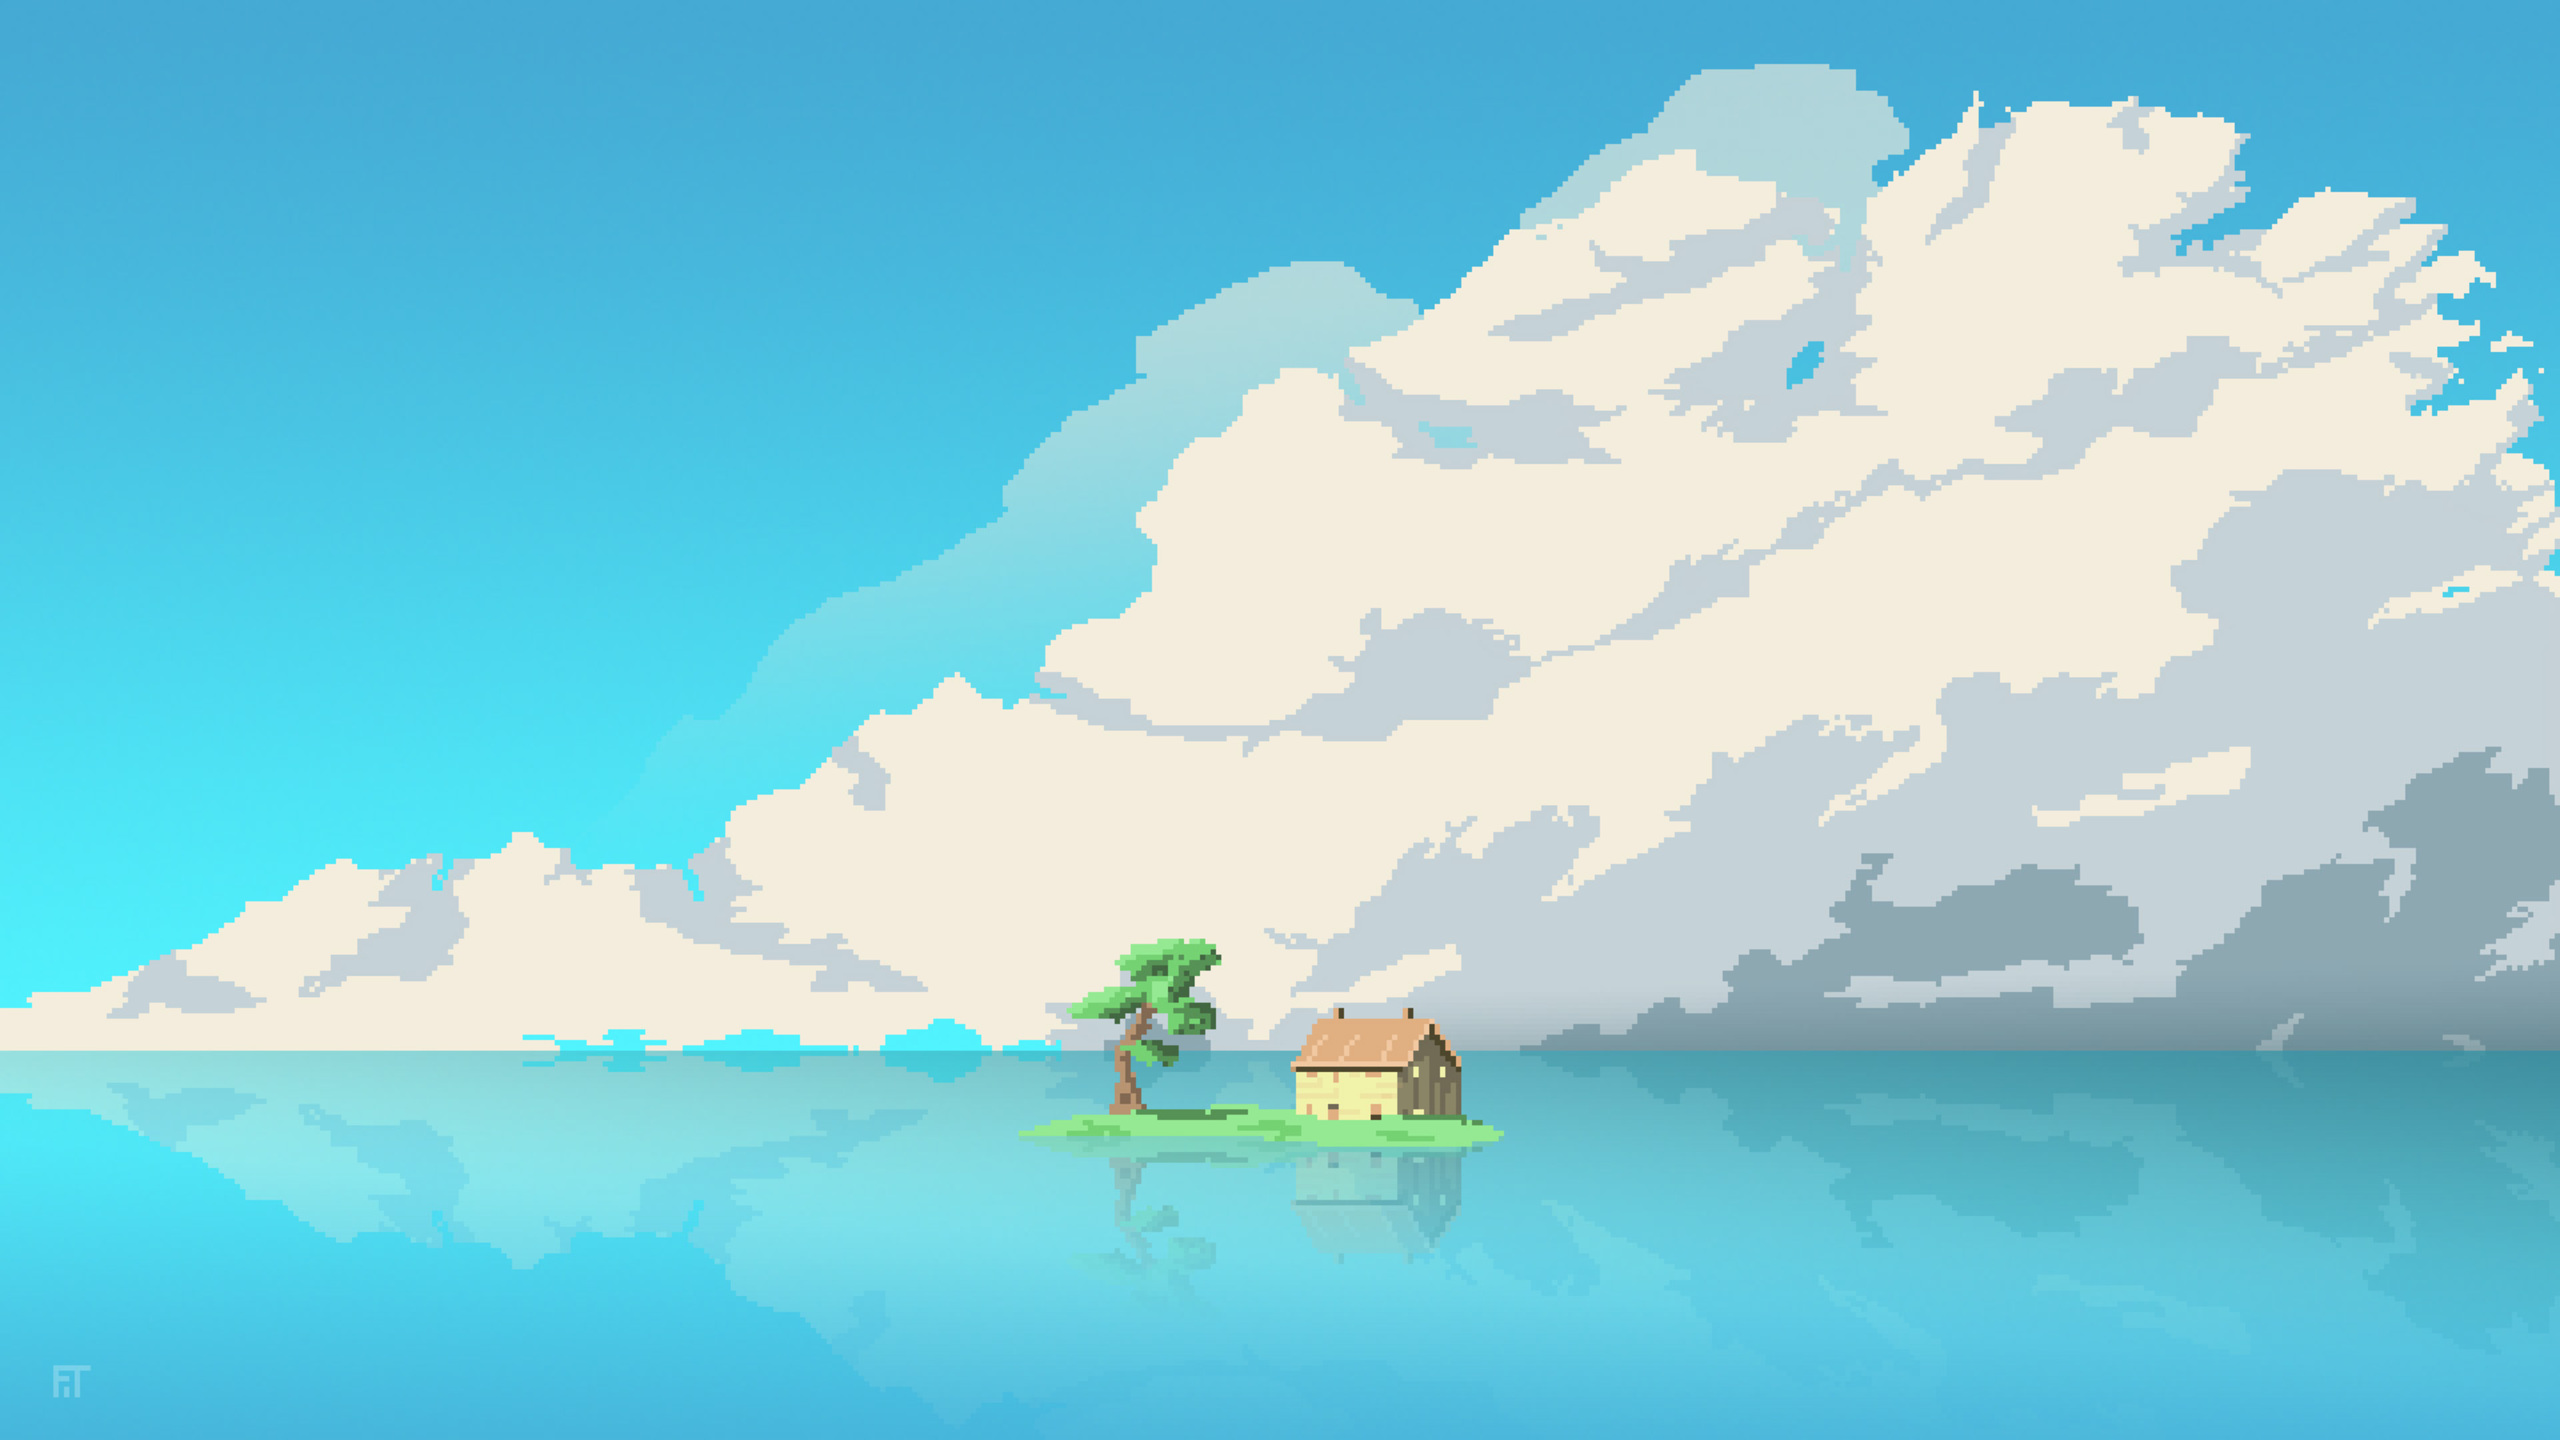 8 Bit Artwork House Island In Middle Of Water In 2560x1440 Resolution. 